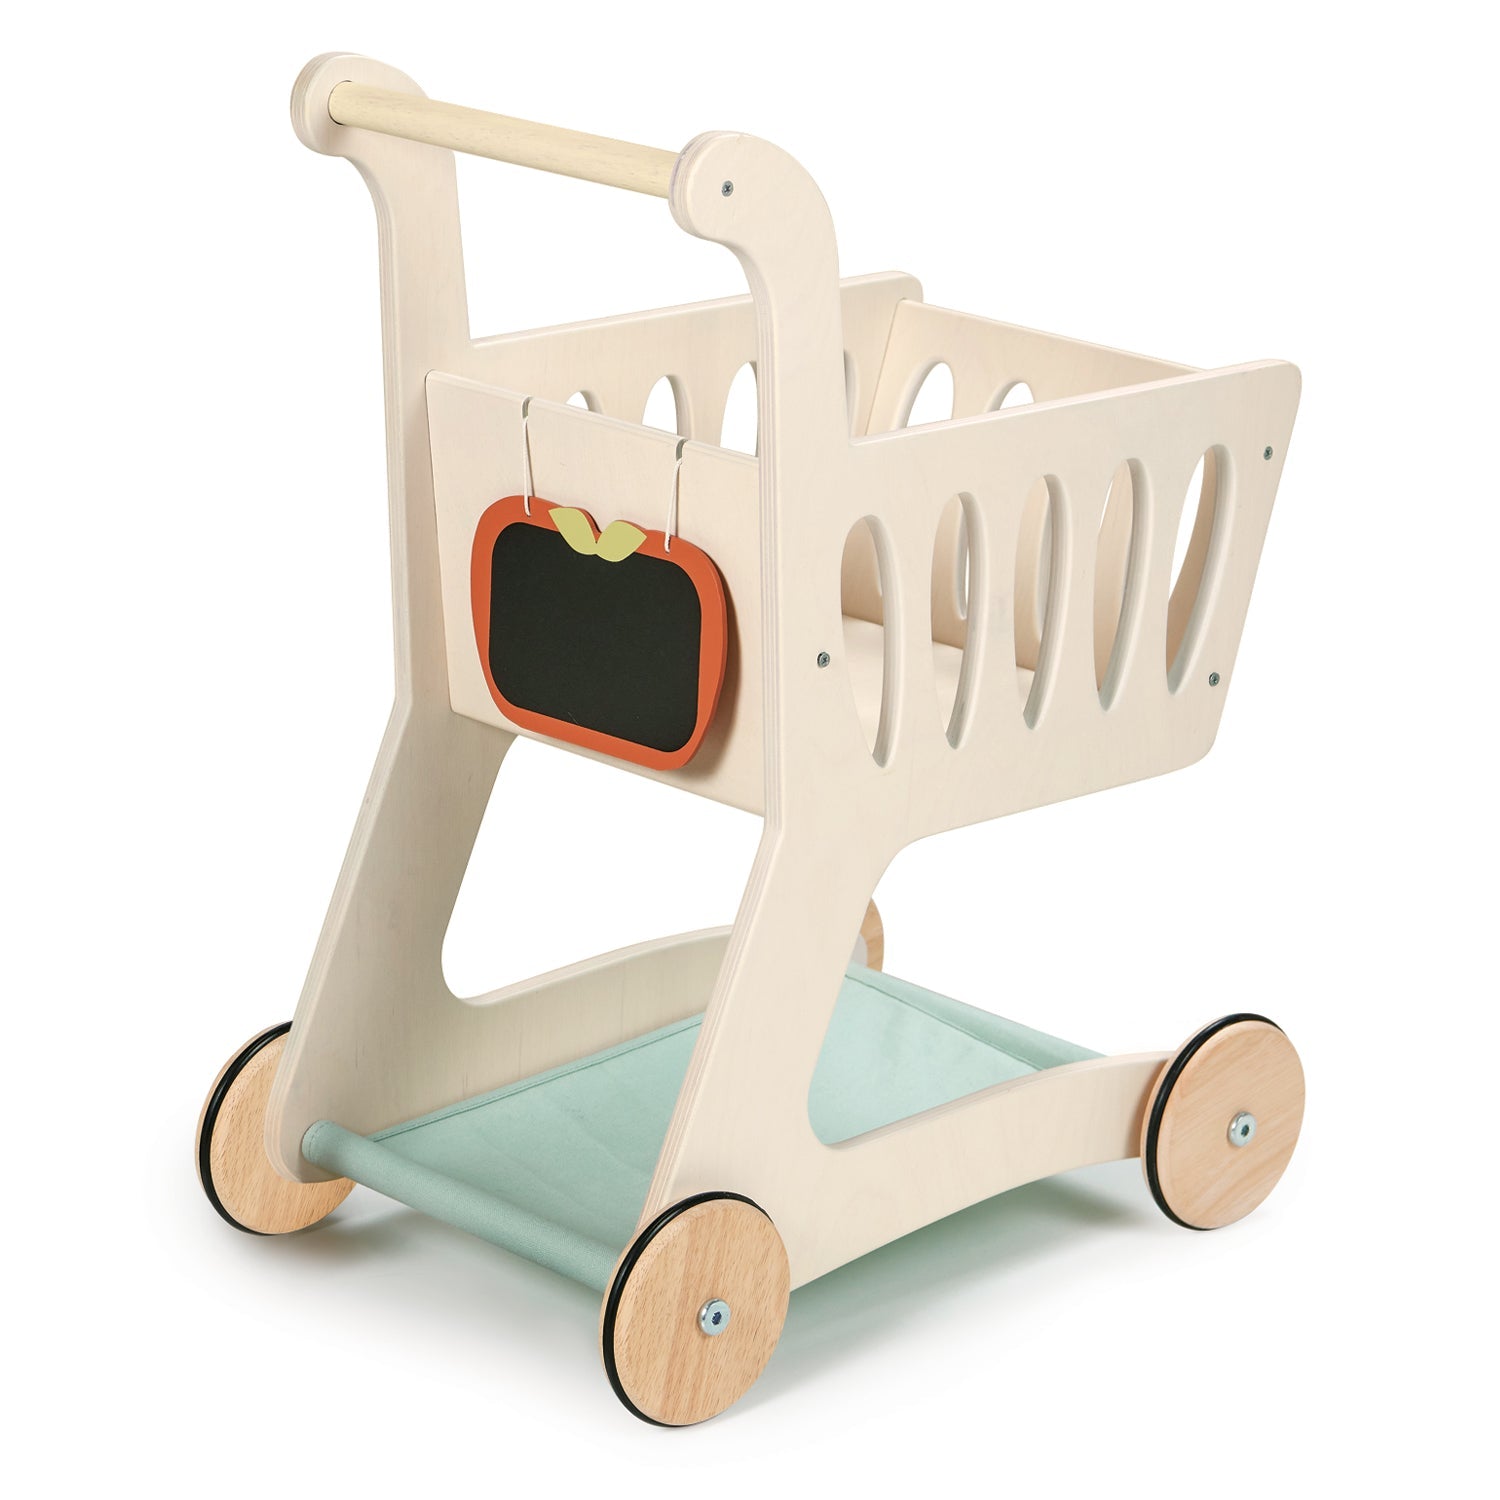 Tender Leaf Toys Shopping Cart - A stylish wooden shopping cart with a fabric base and an apple-shaped chalkboard, perfect for shopping adventures and creative lists or drawings.